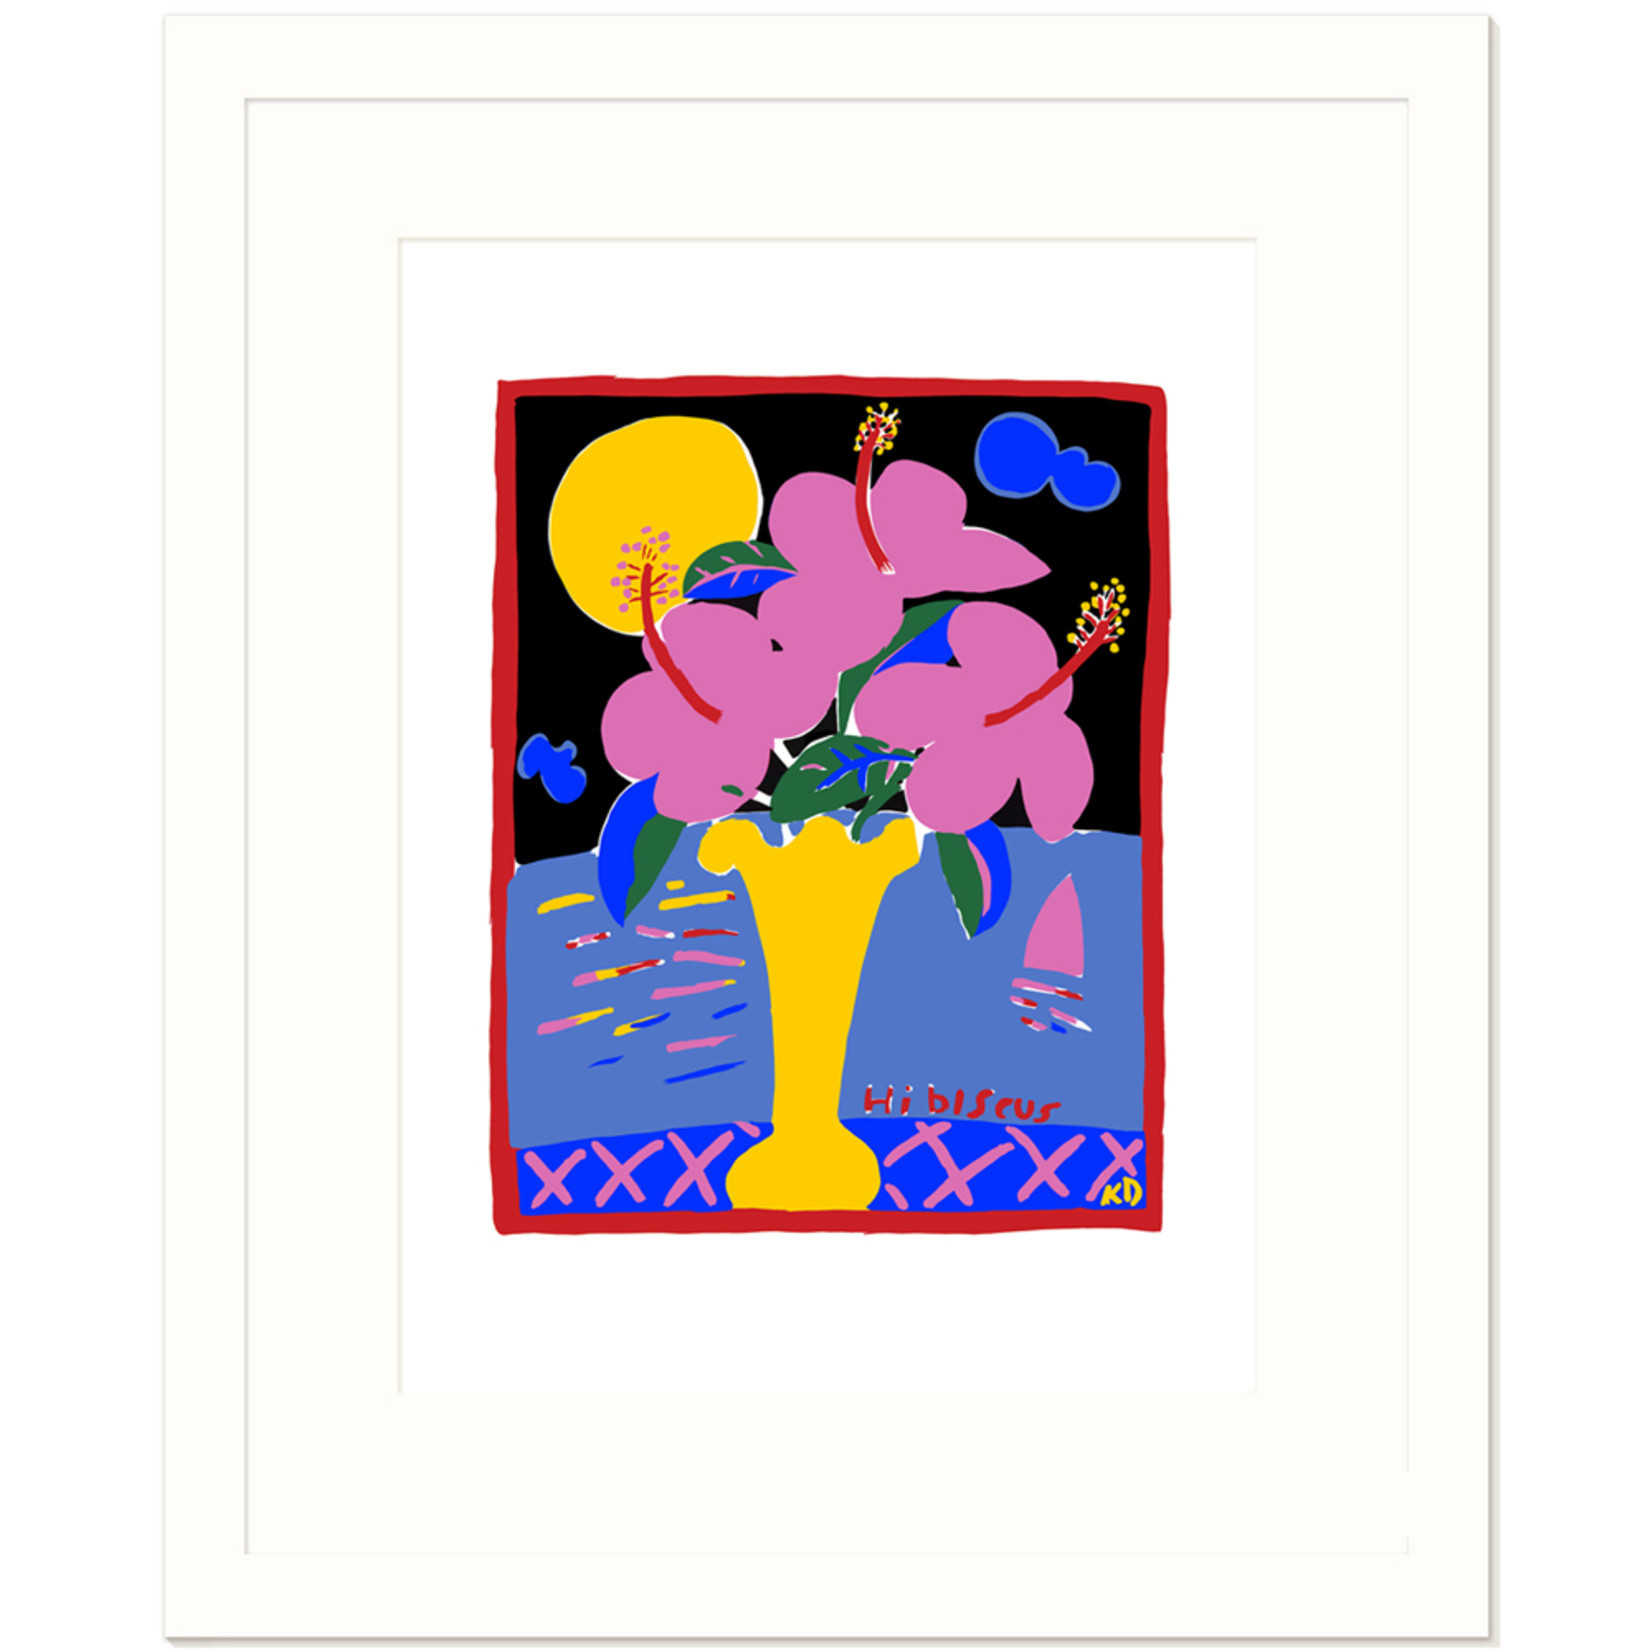 Limited Edition Prints Hibiscus, 1984